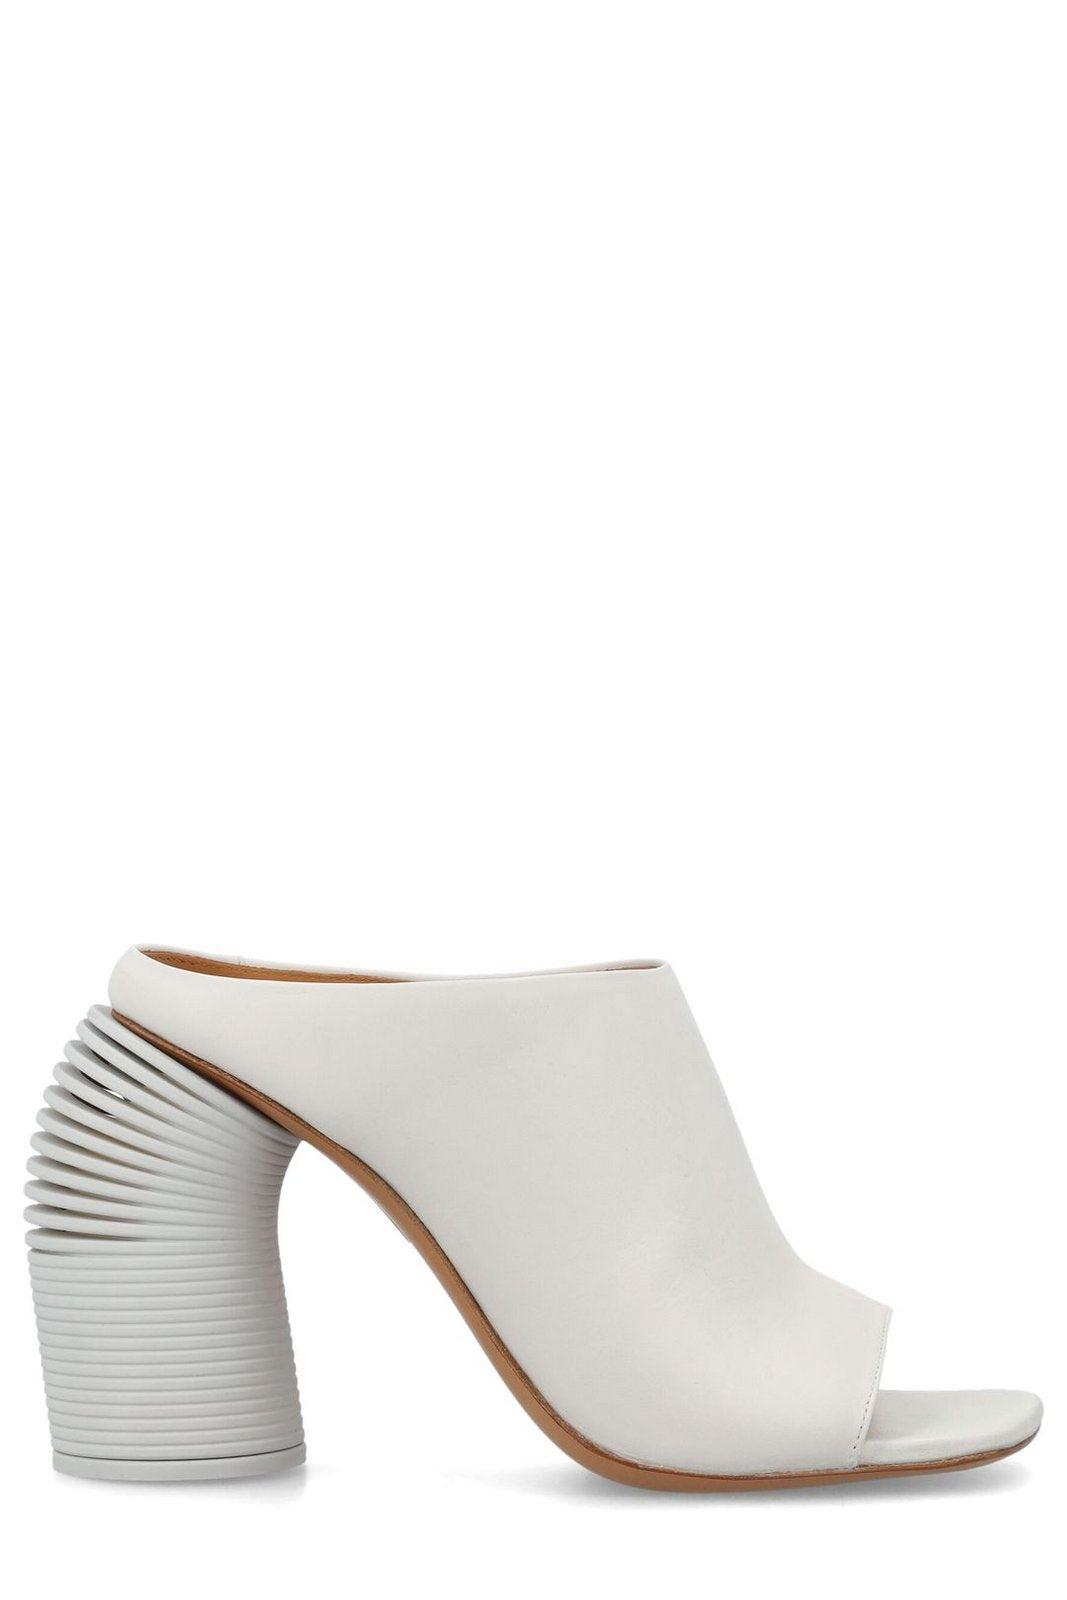 Off-White Spring Open Toe Mules